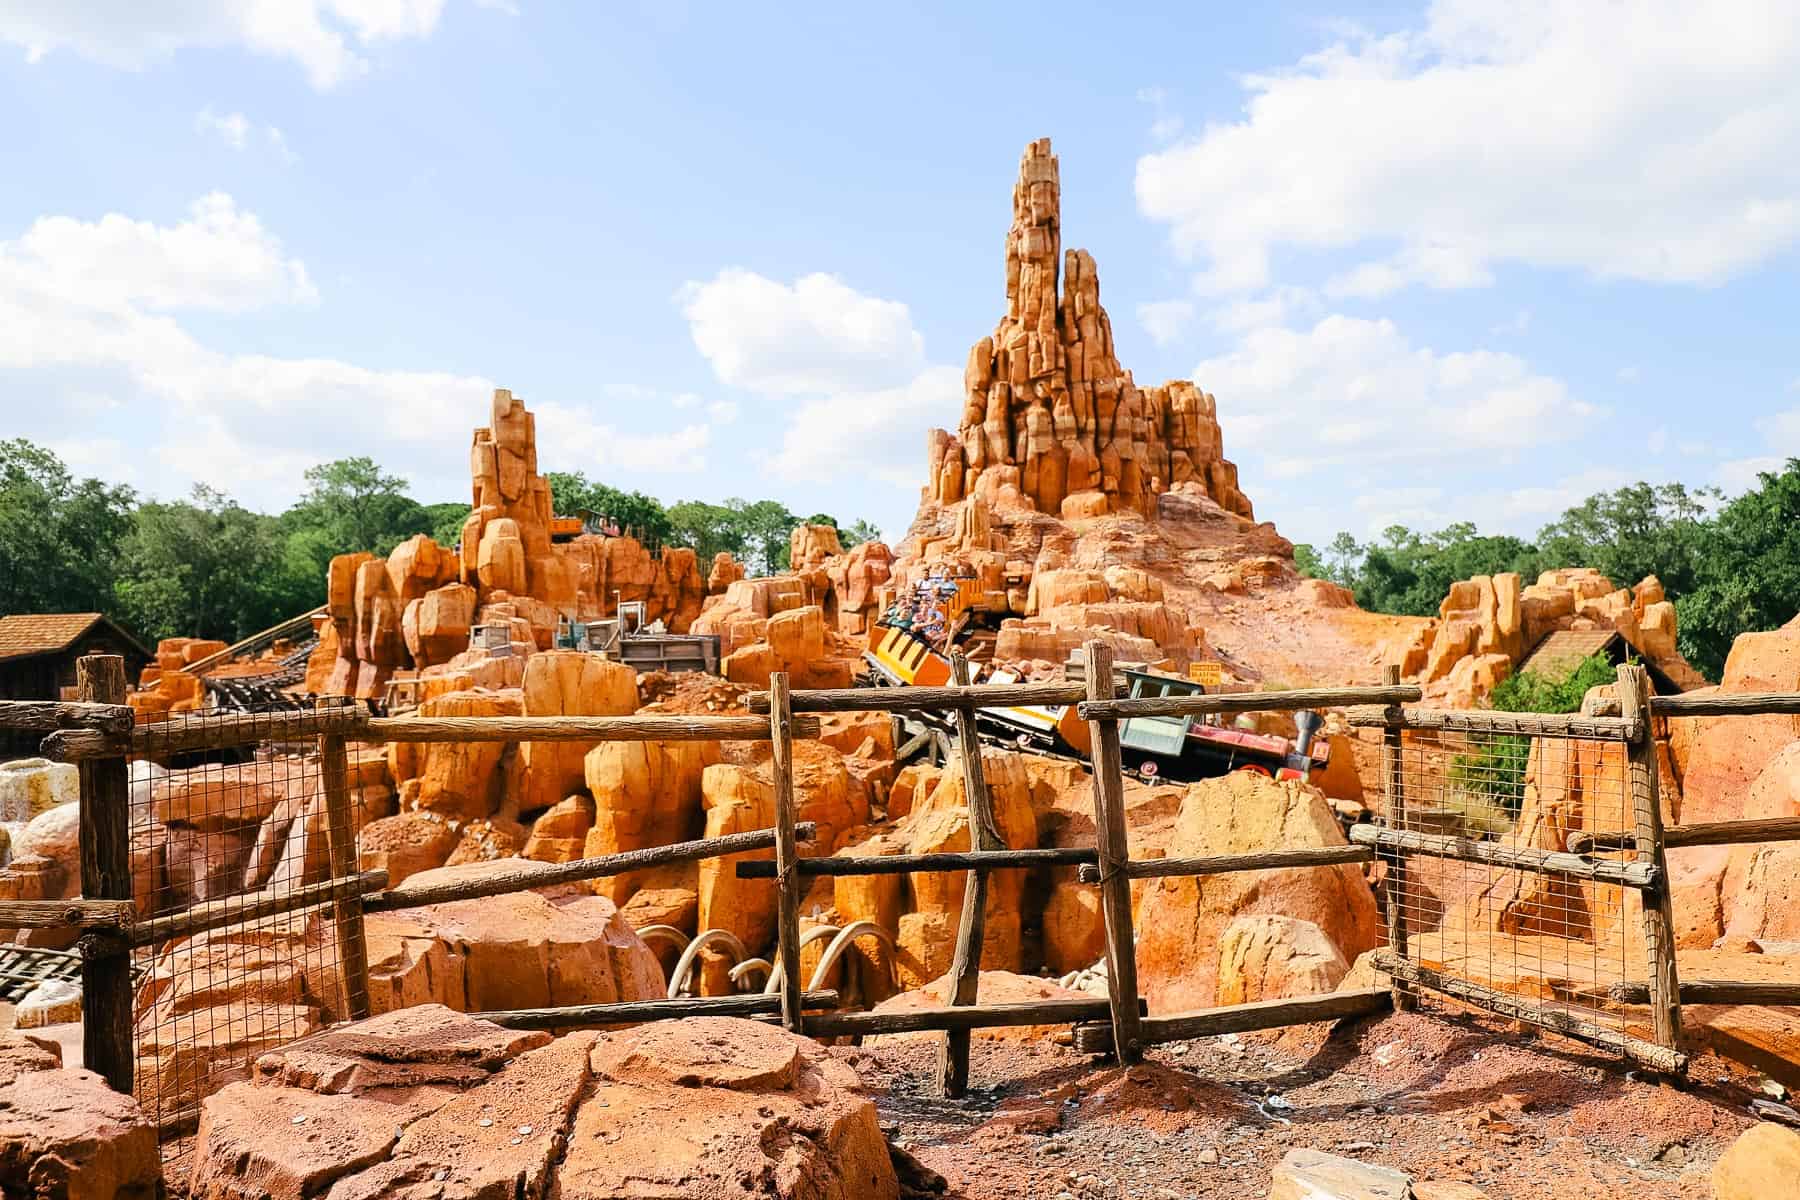 A train car pulls guests over the hill of Big Thunder Mountain Railroad. 